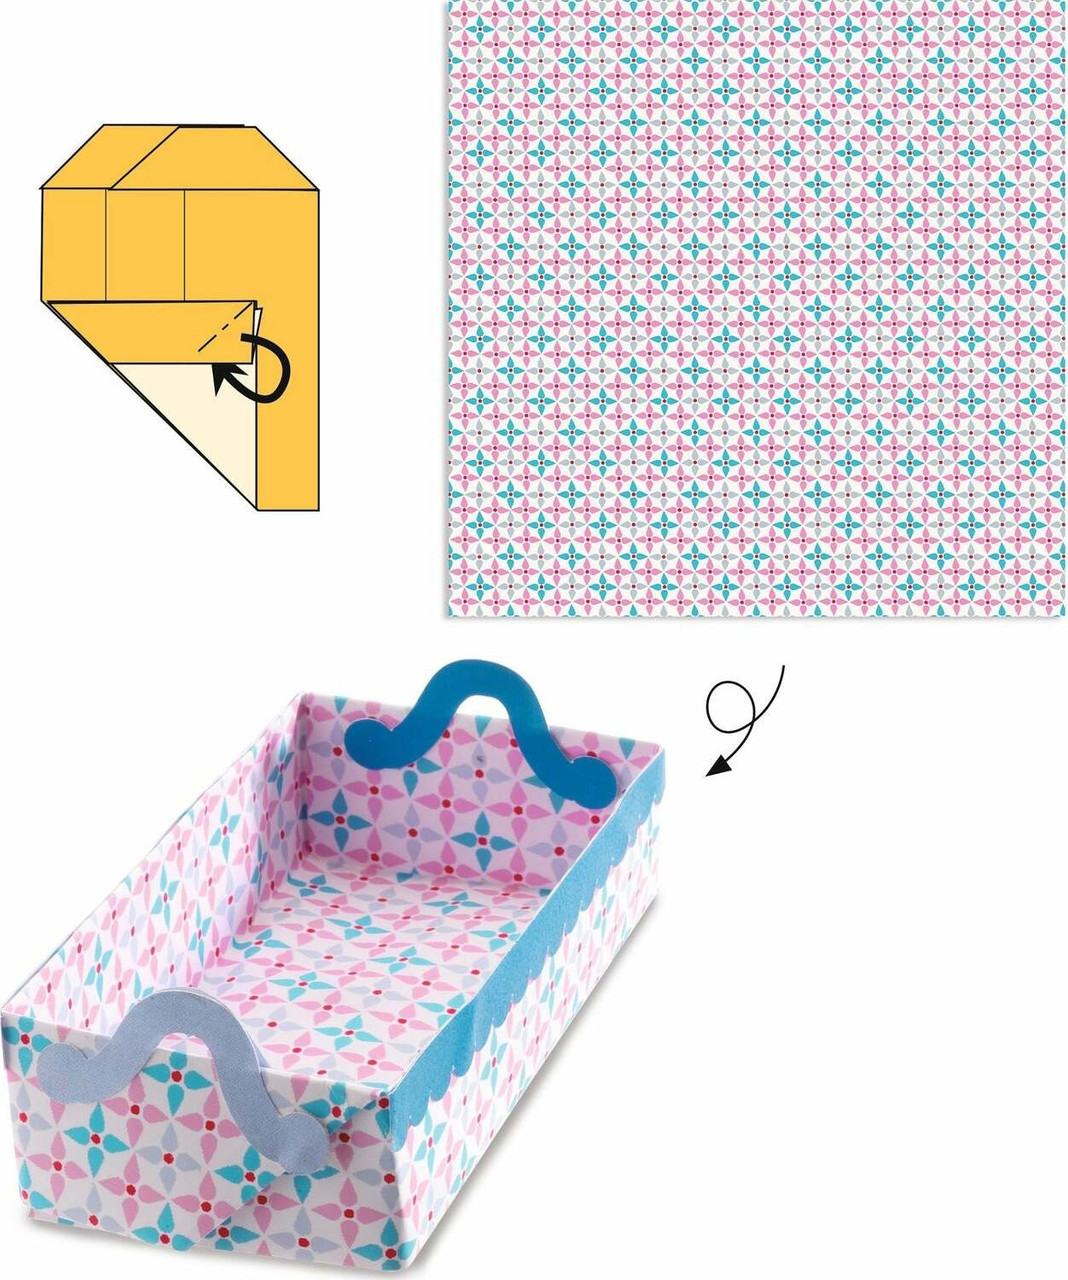 Small Boxes Origami Paper Craft Kit 3